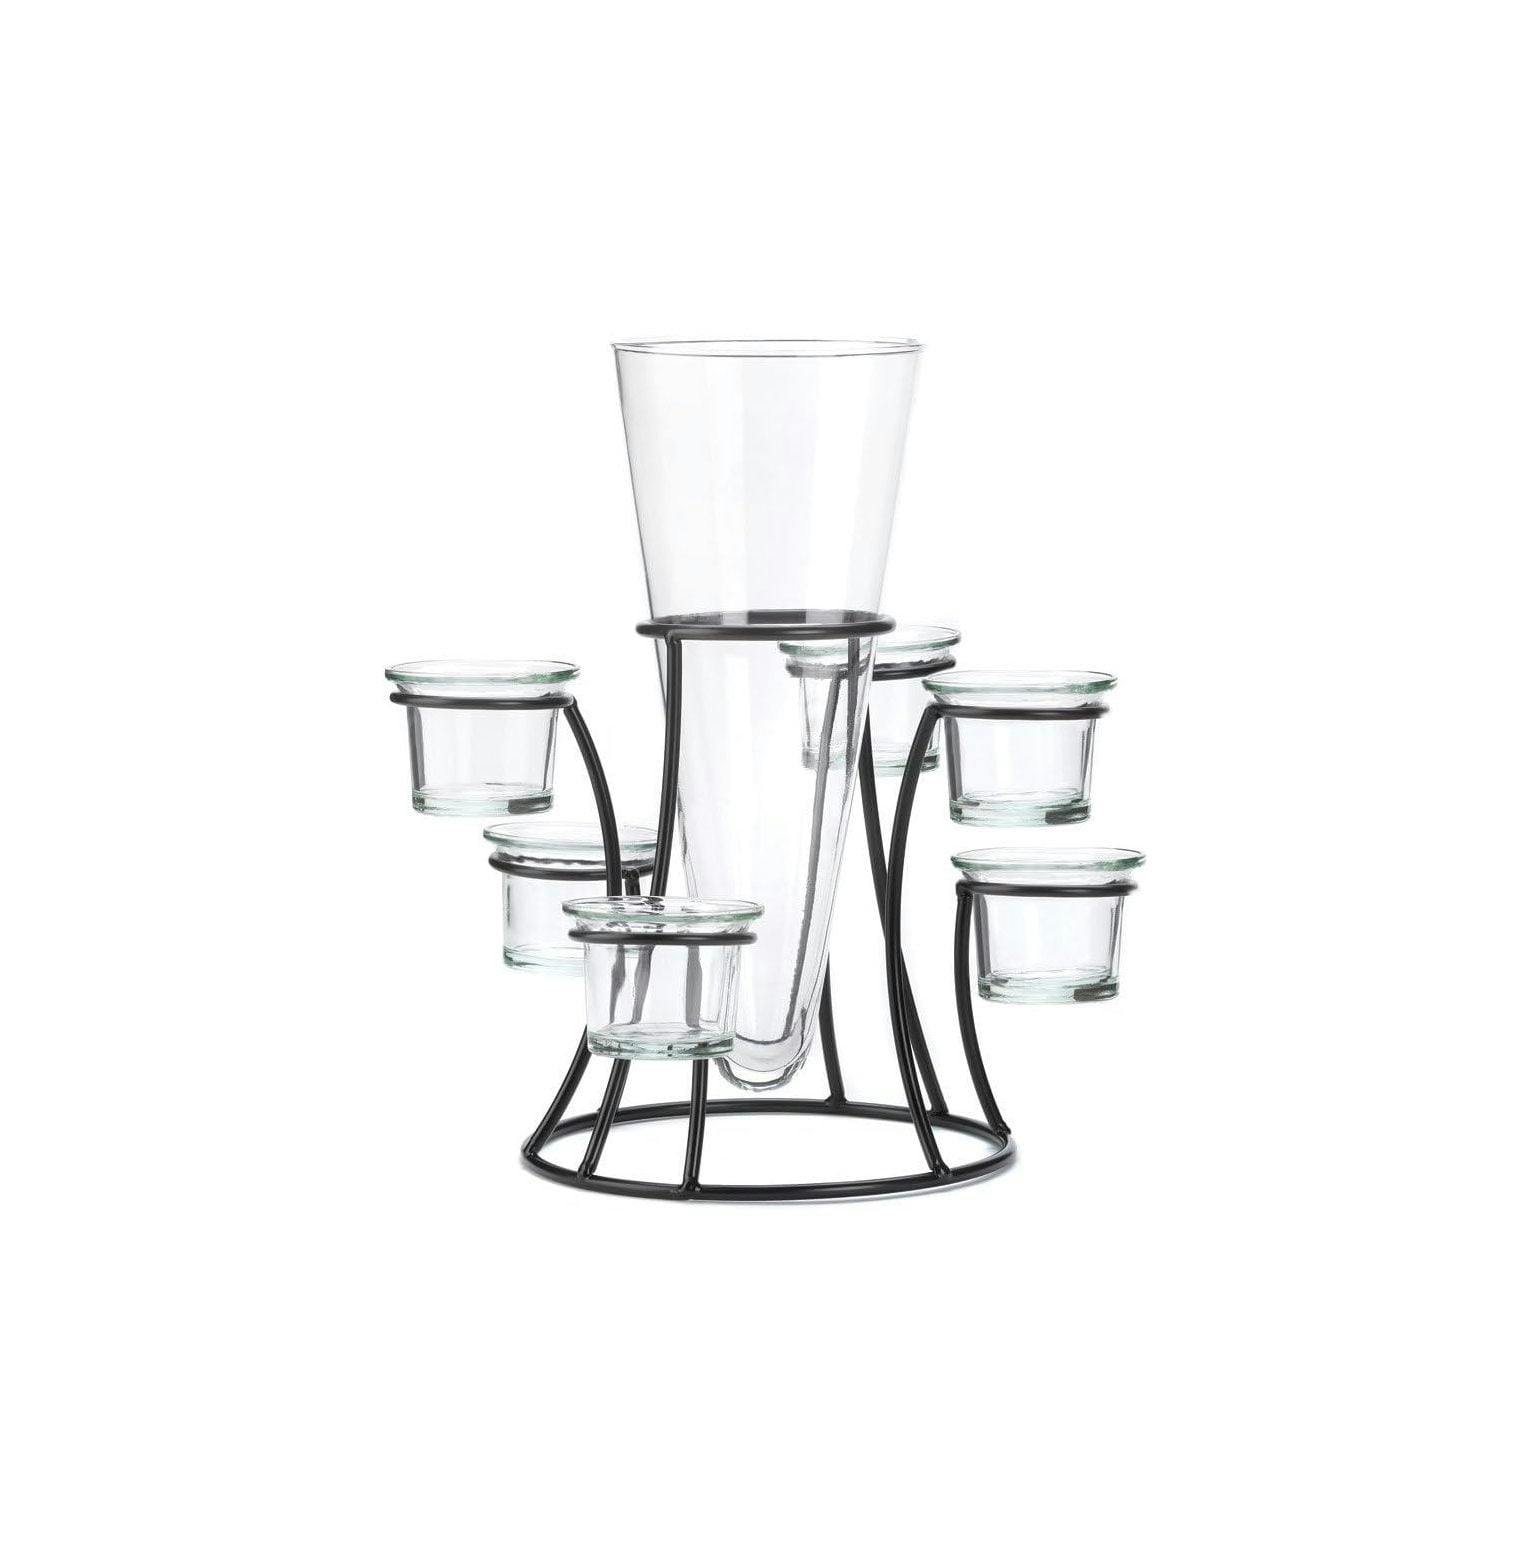 Elegant Winter Glow Circular Candle Stand with Glass Vase